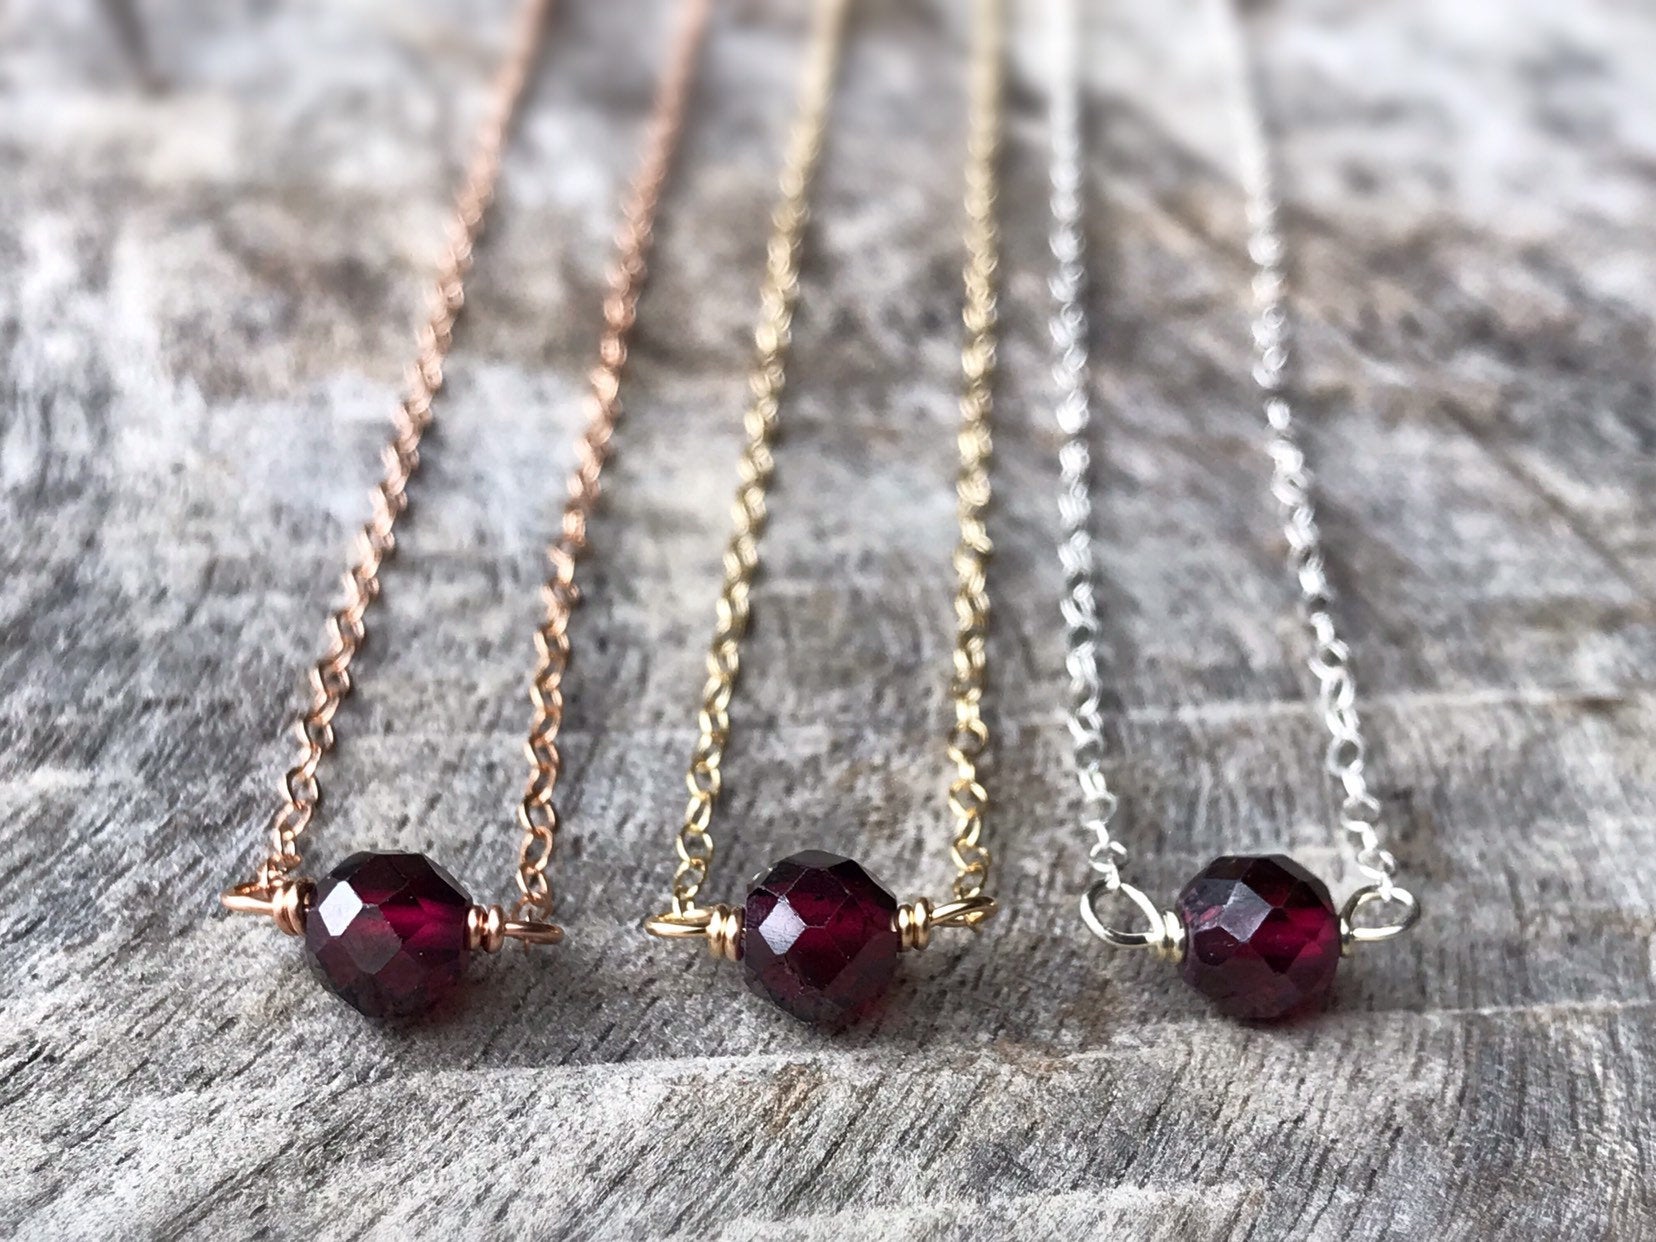 14K White Gold Gemstone Necklace With Faceted Garnet Gemstones 16 Inches 